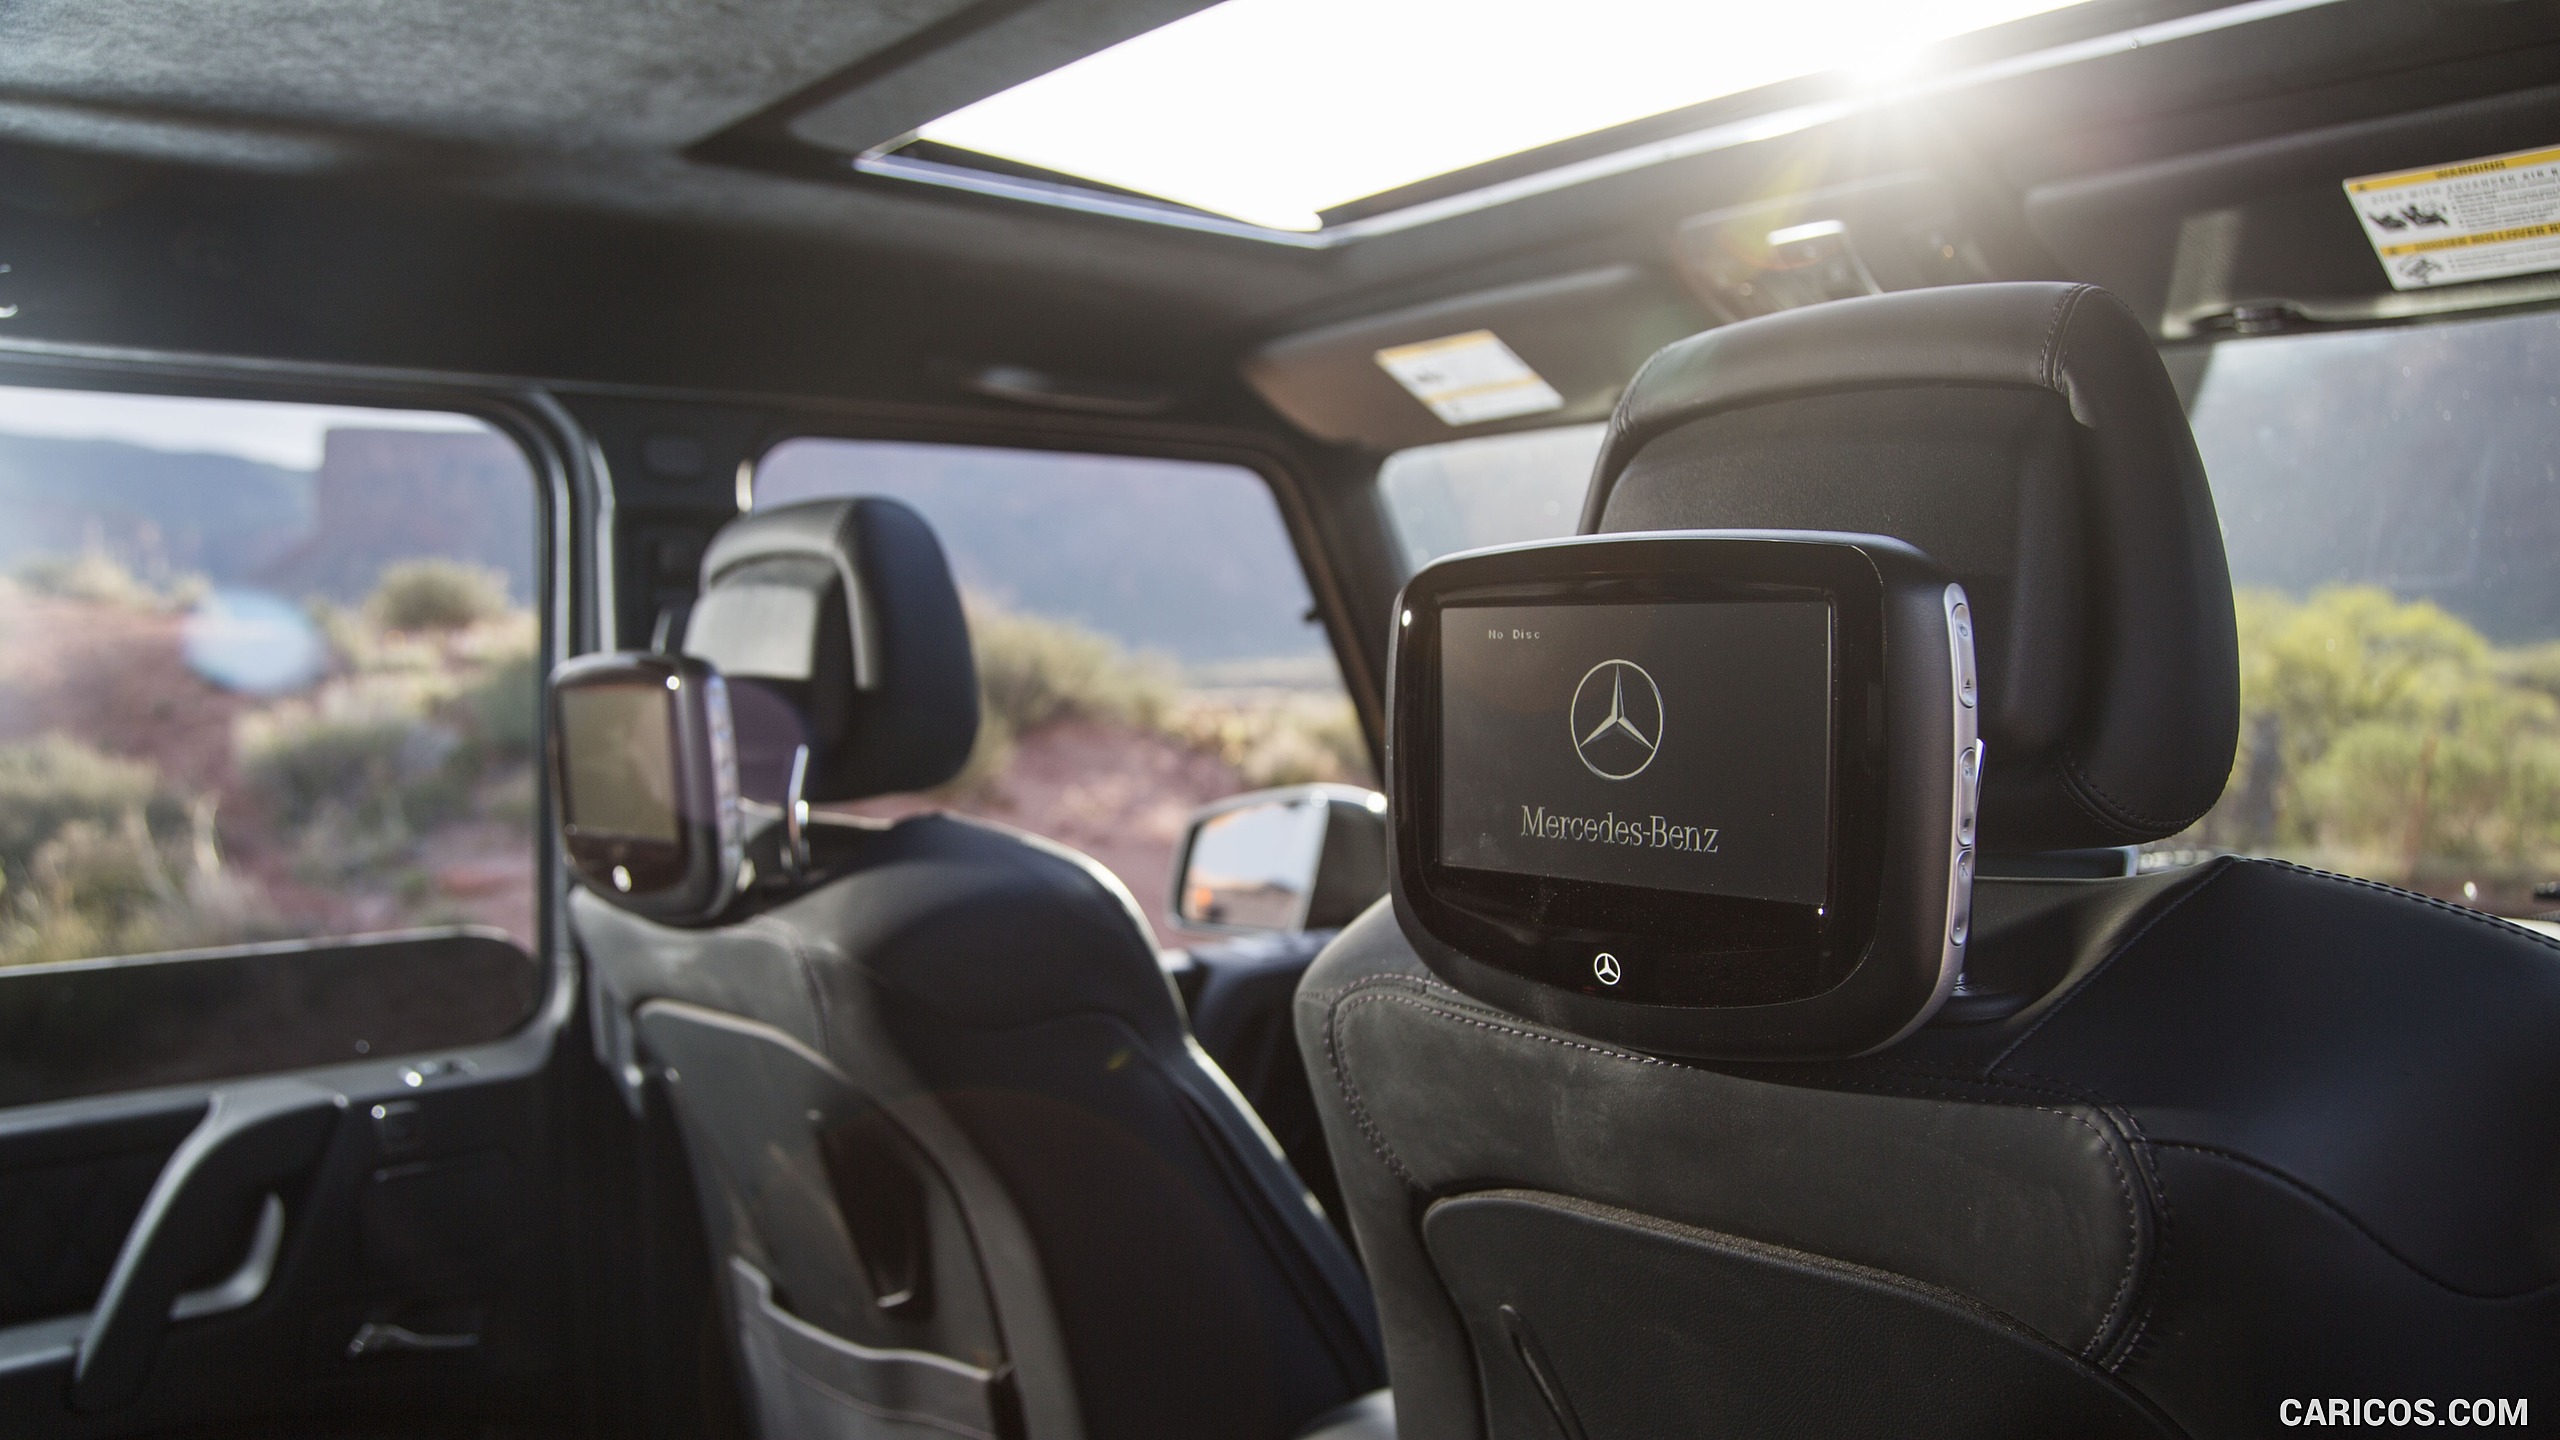 2016 Mercedes-AMG G65 (US-Spec) - Rear Seat Entertainment System, #41 of 41